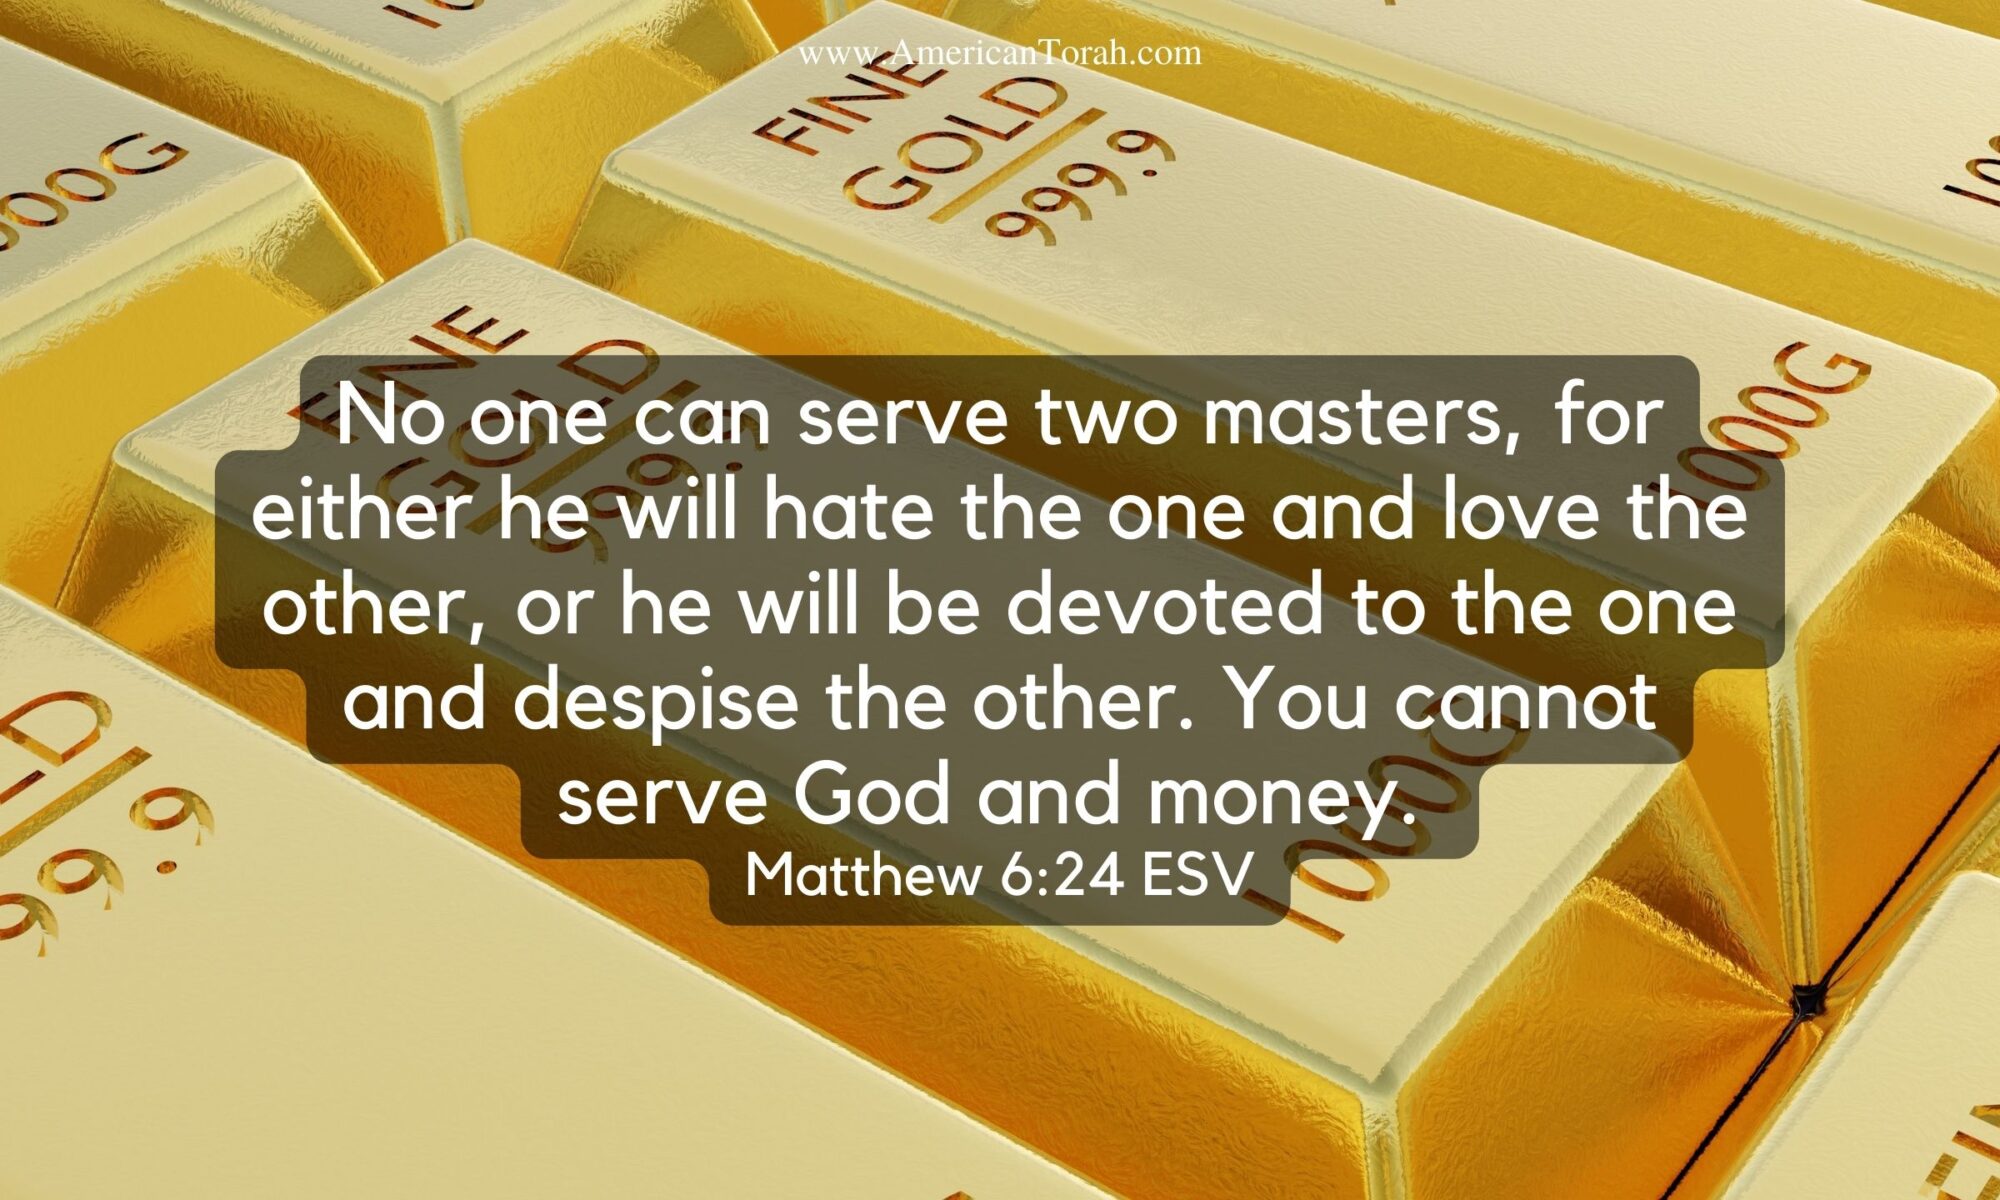 No one can serve two masters, for either he will hate the one and love the other, or he will be devoted to the one and despise the other. You cannot serve God and money. Matthew 6:24 ESV